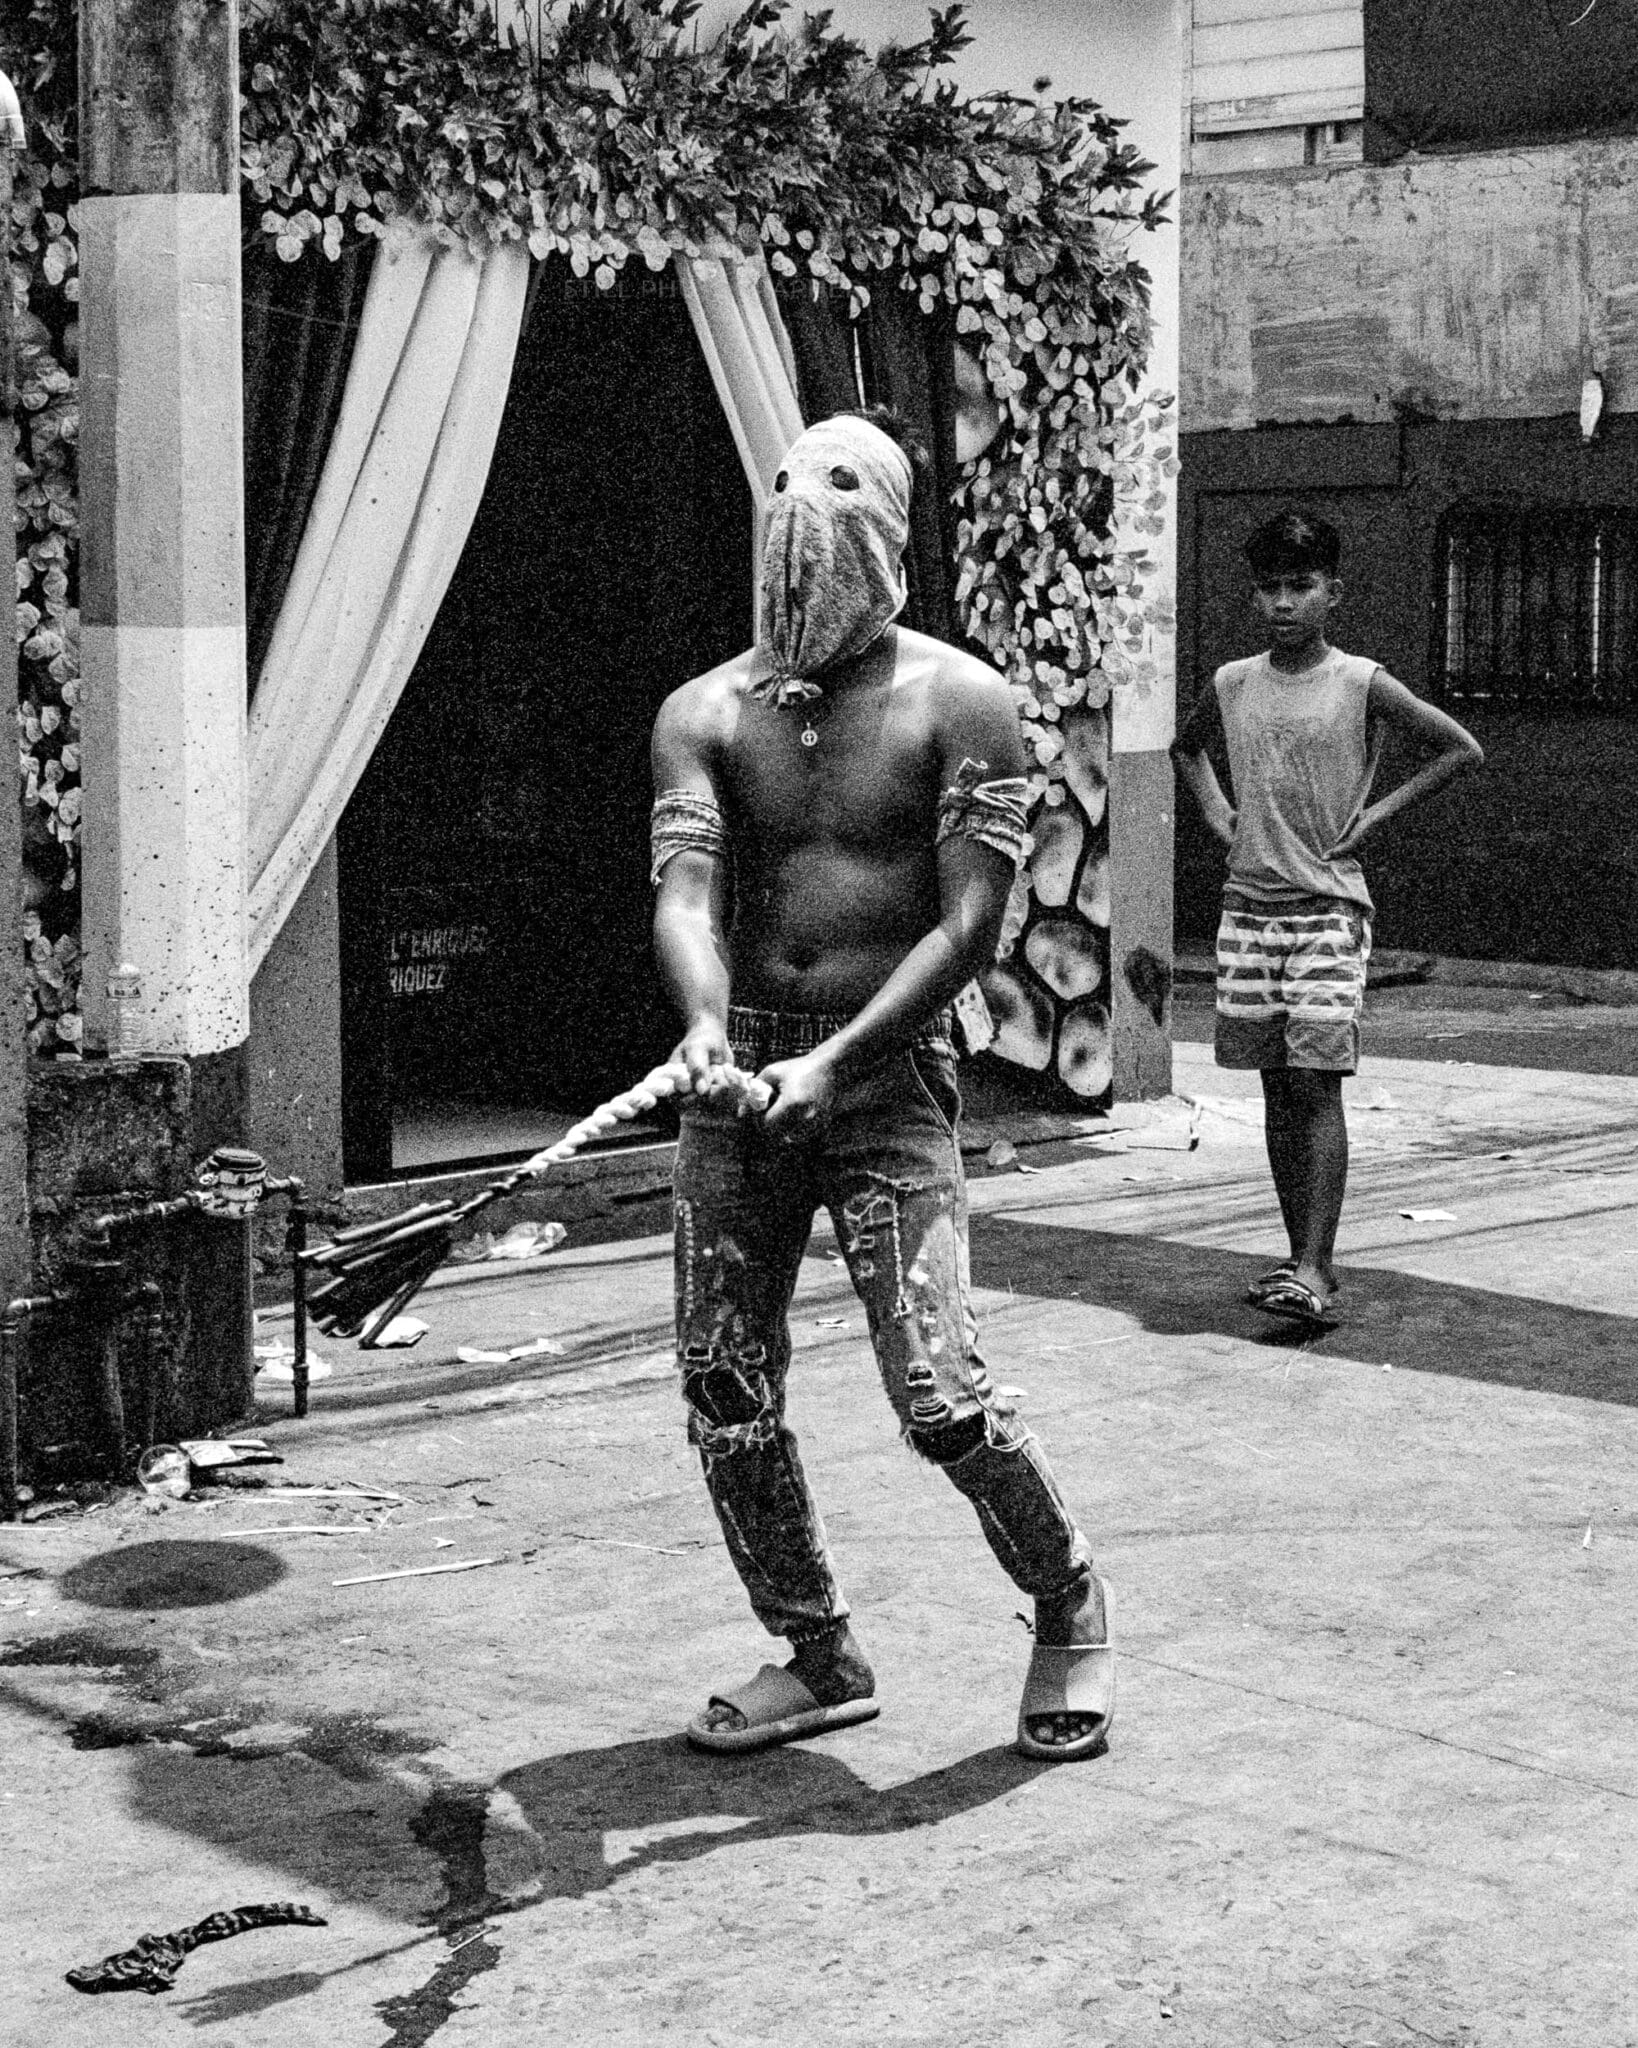 Masked figure performing traditional flogging ritual in Philippines urban alleyway.